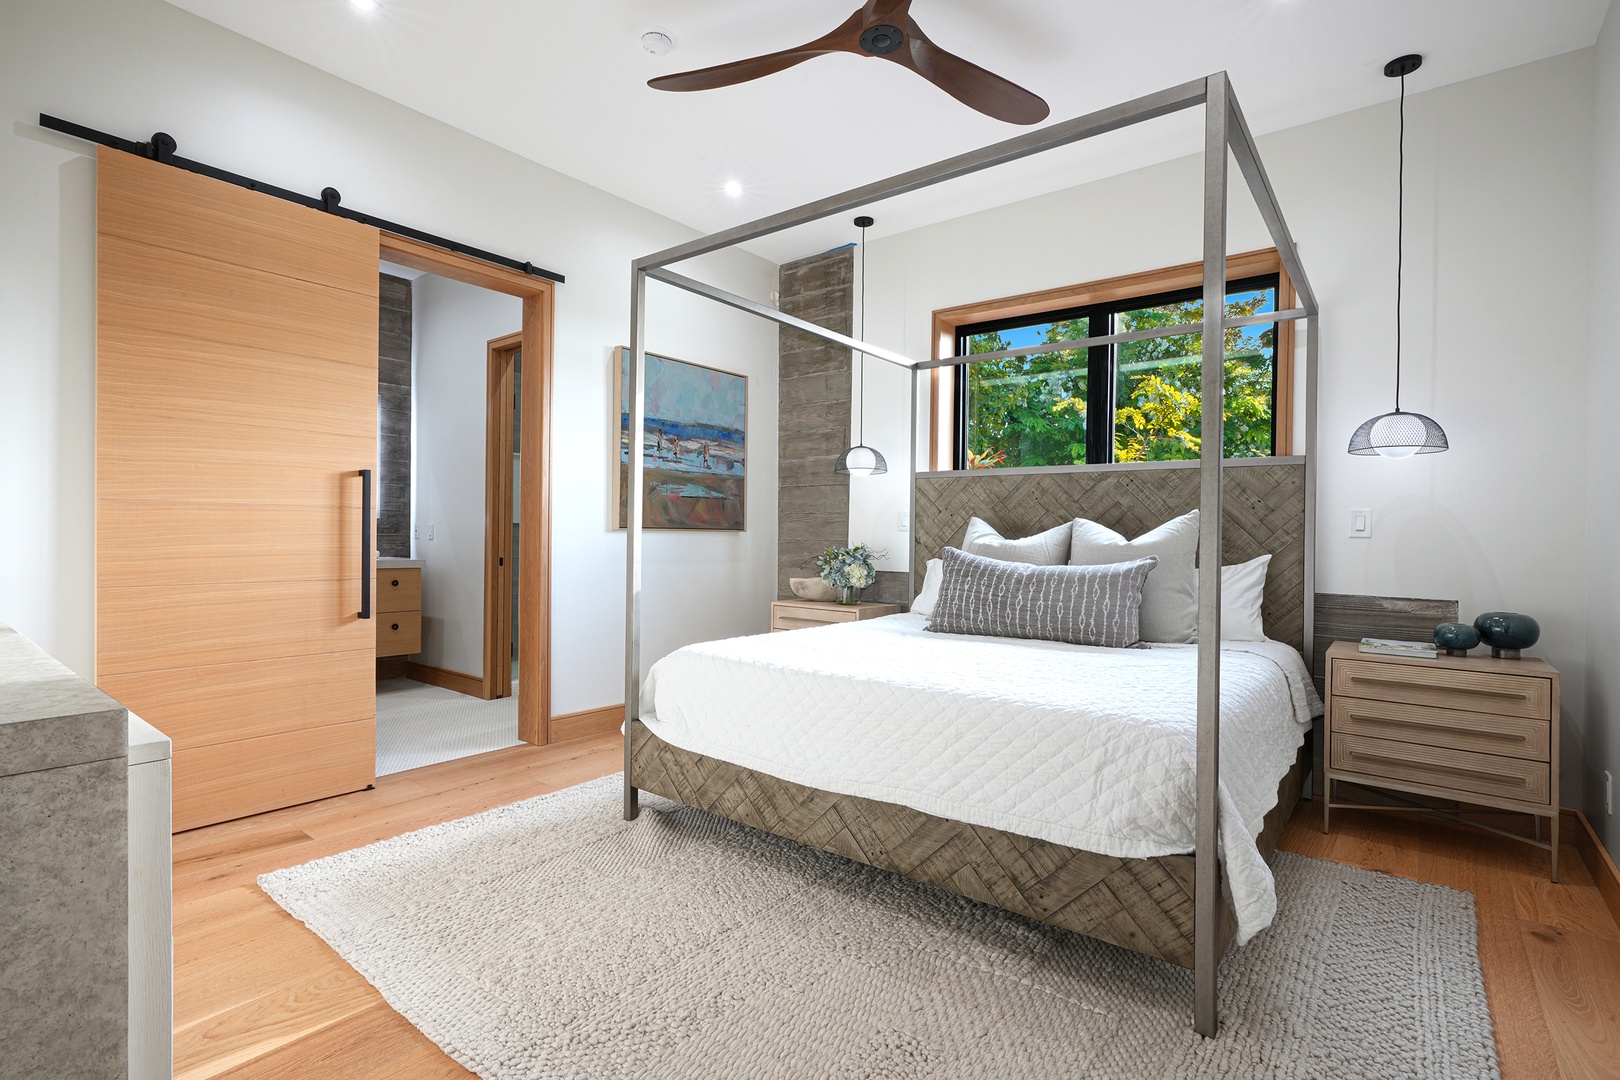 Koloa Vacation Rentals, Hale Keaka at Kukui'ula - Slumber in sophistication in this guest bedroom 2, featuring a four-poster bed and a harmonious blend of natural light and modern comfort.